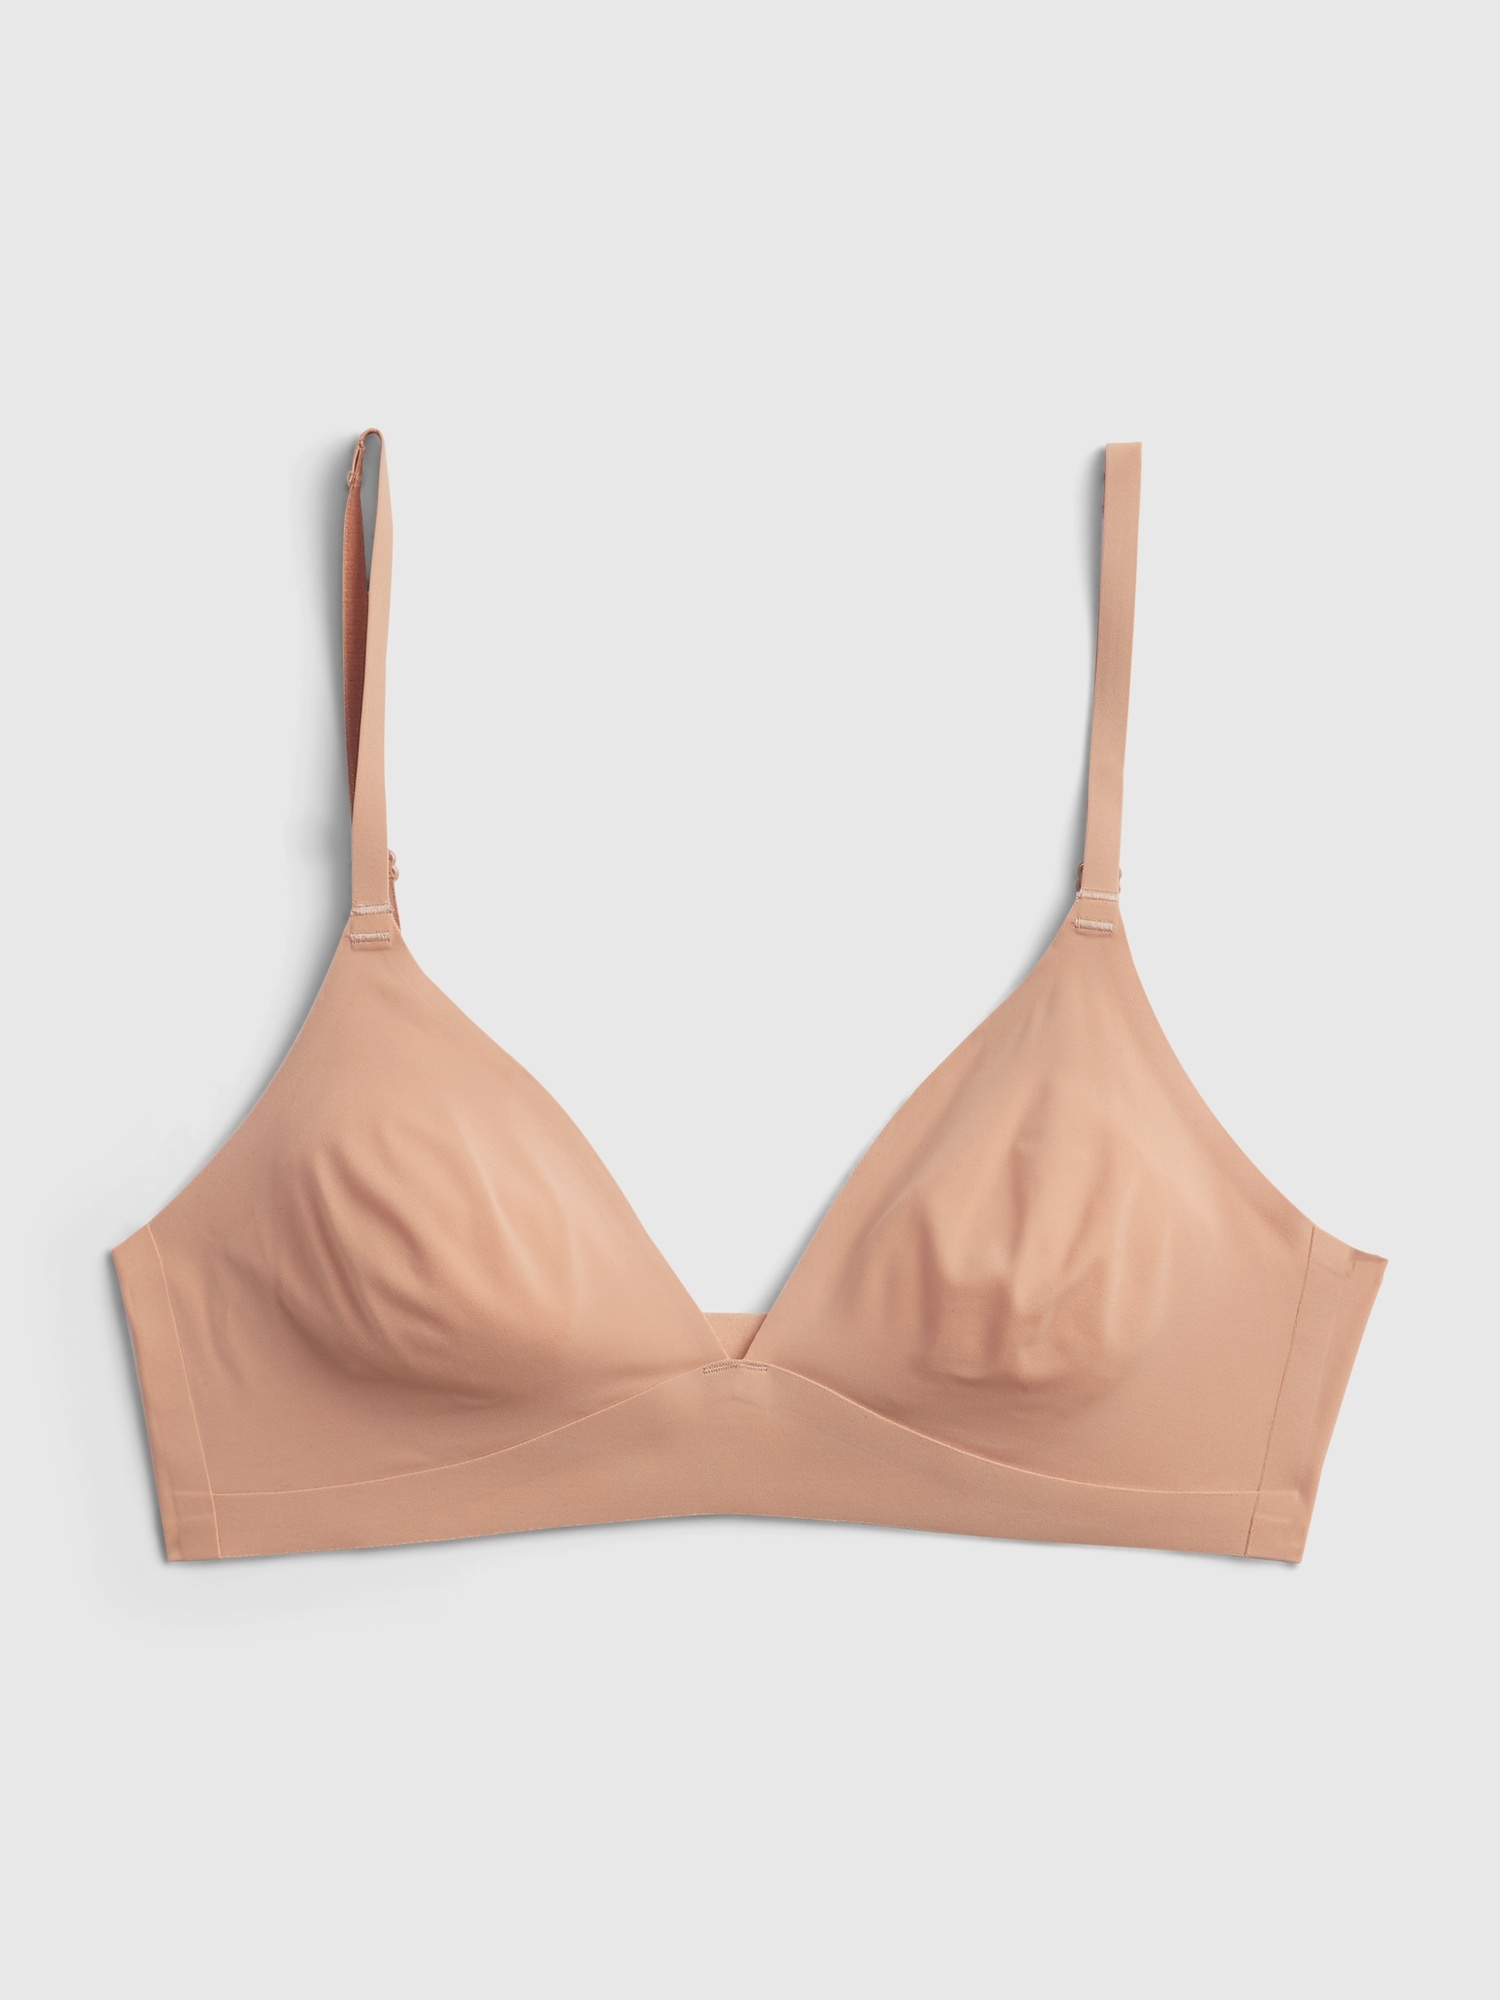 GAP BODY Bralette Top, Can't really see it on the